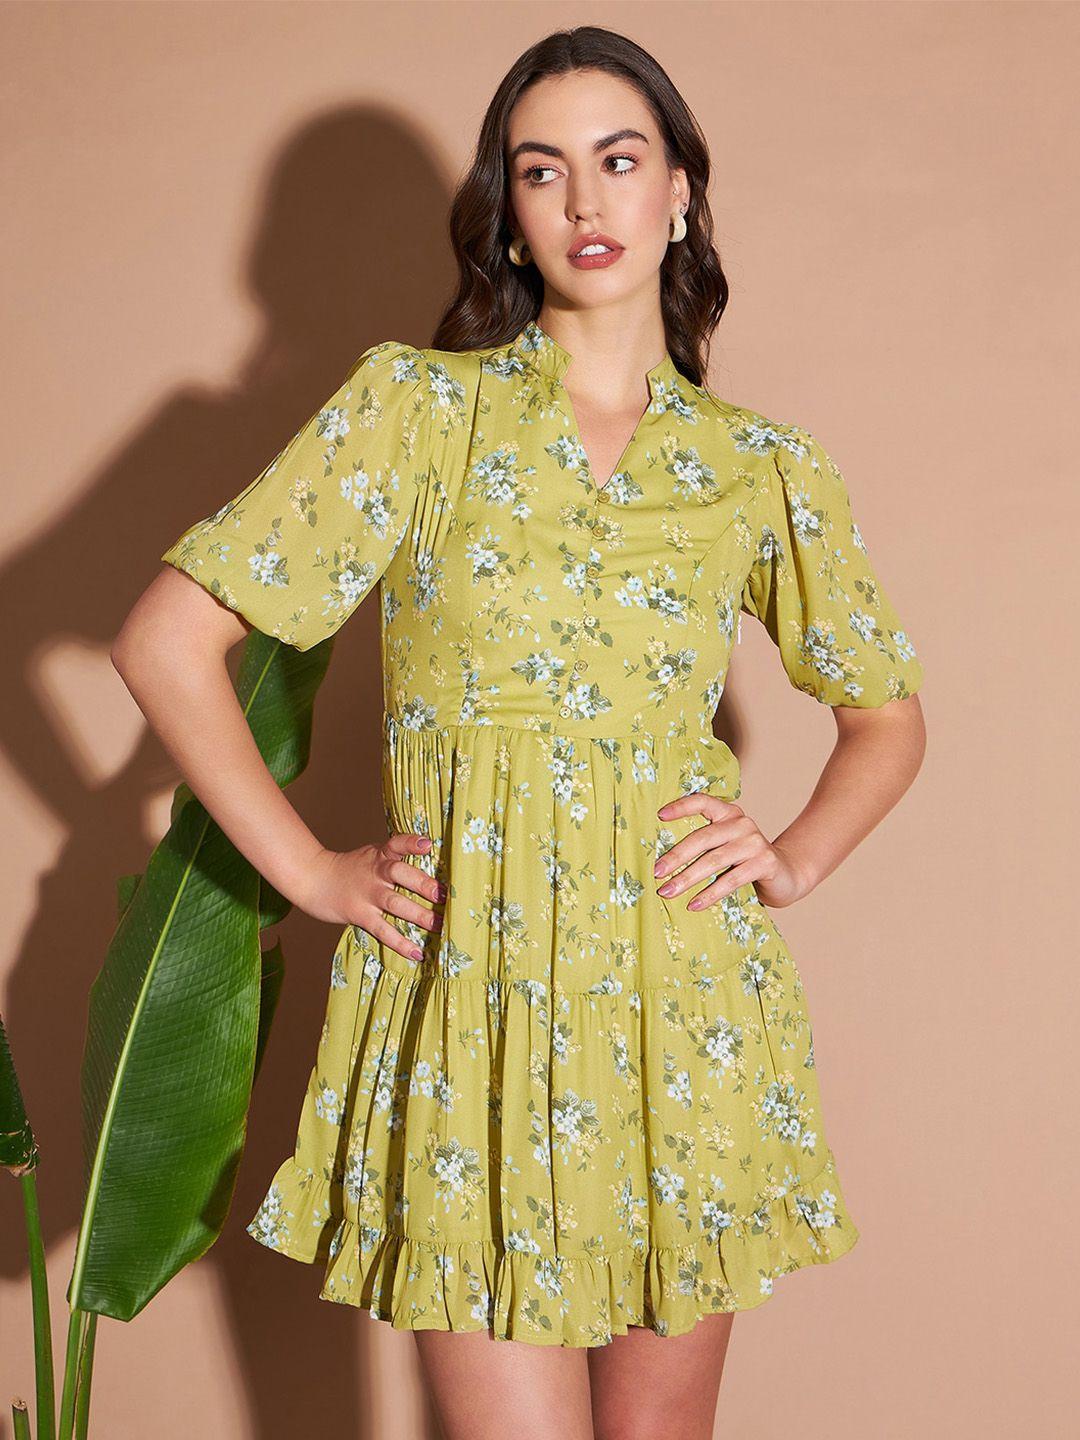 marie claire green floral printed v-neck puff sleeves gathered fit & flare dress